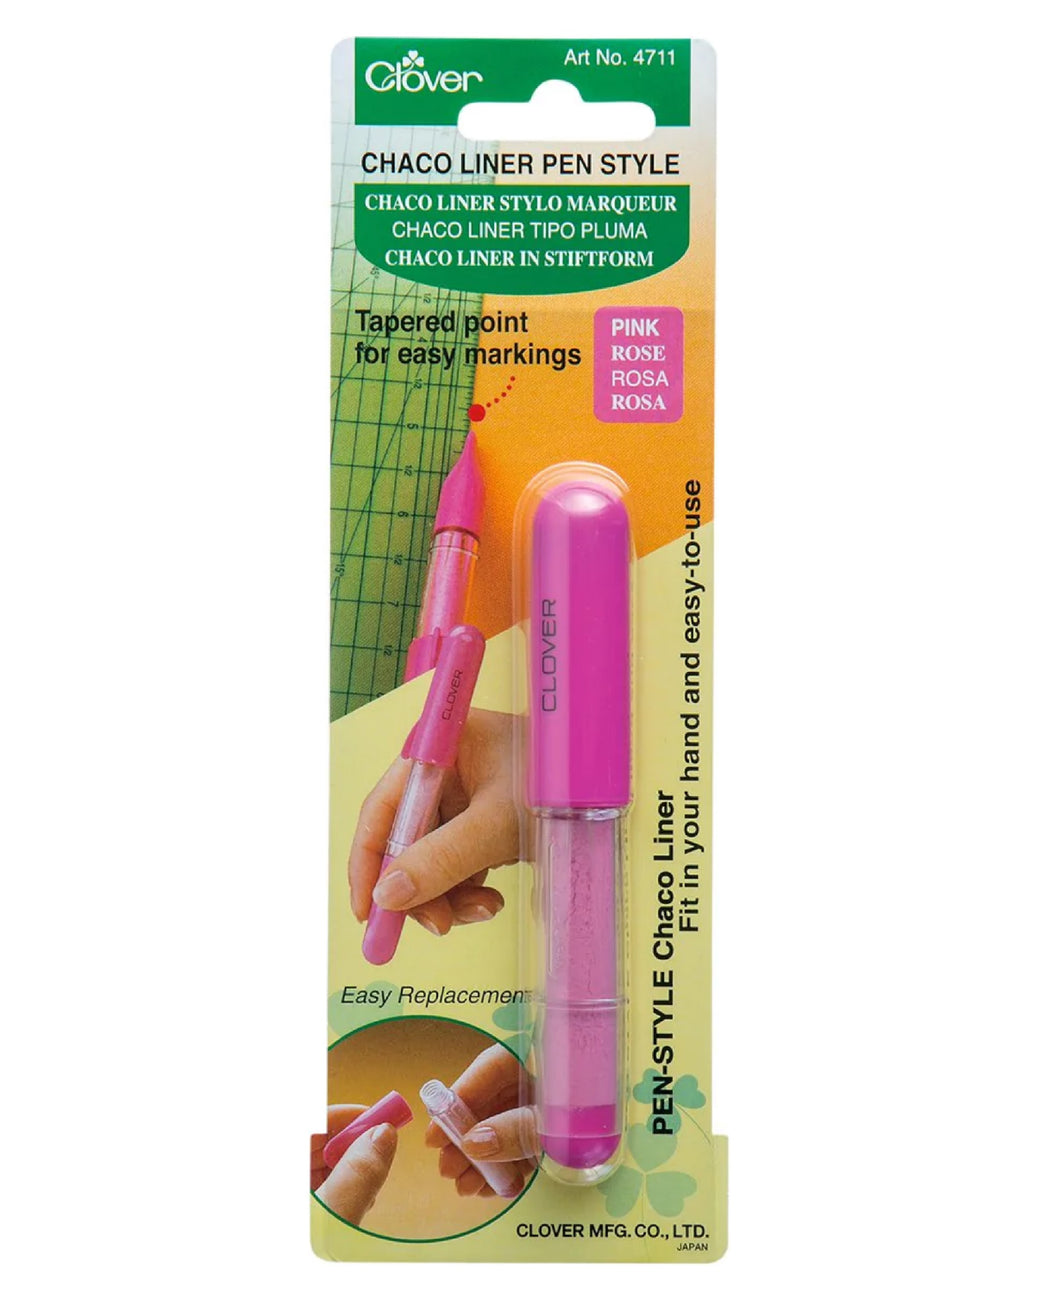 Chaco Liner Pen Style For Sewing_ZIPPERANDTHREAD - Zipper and Thread